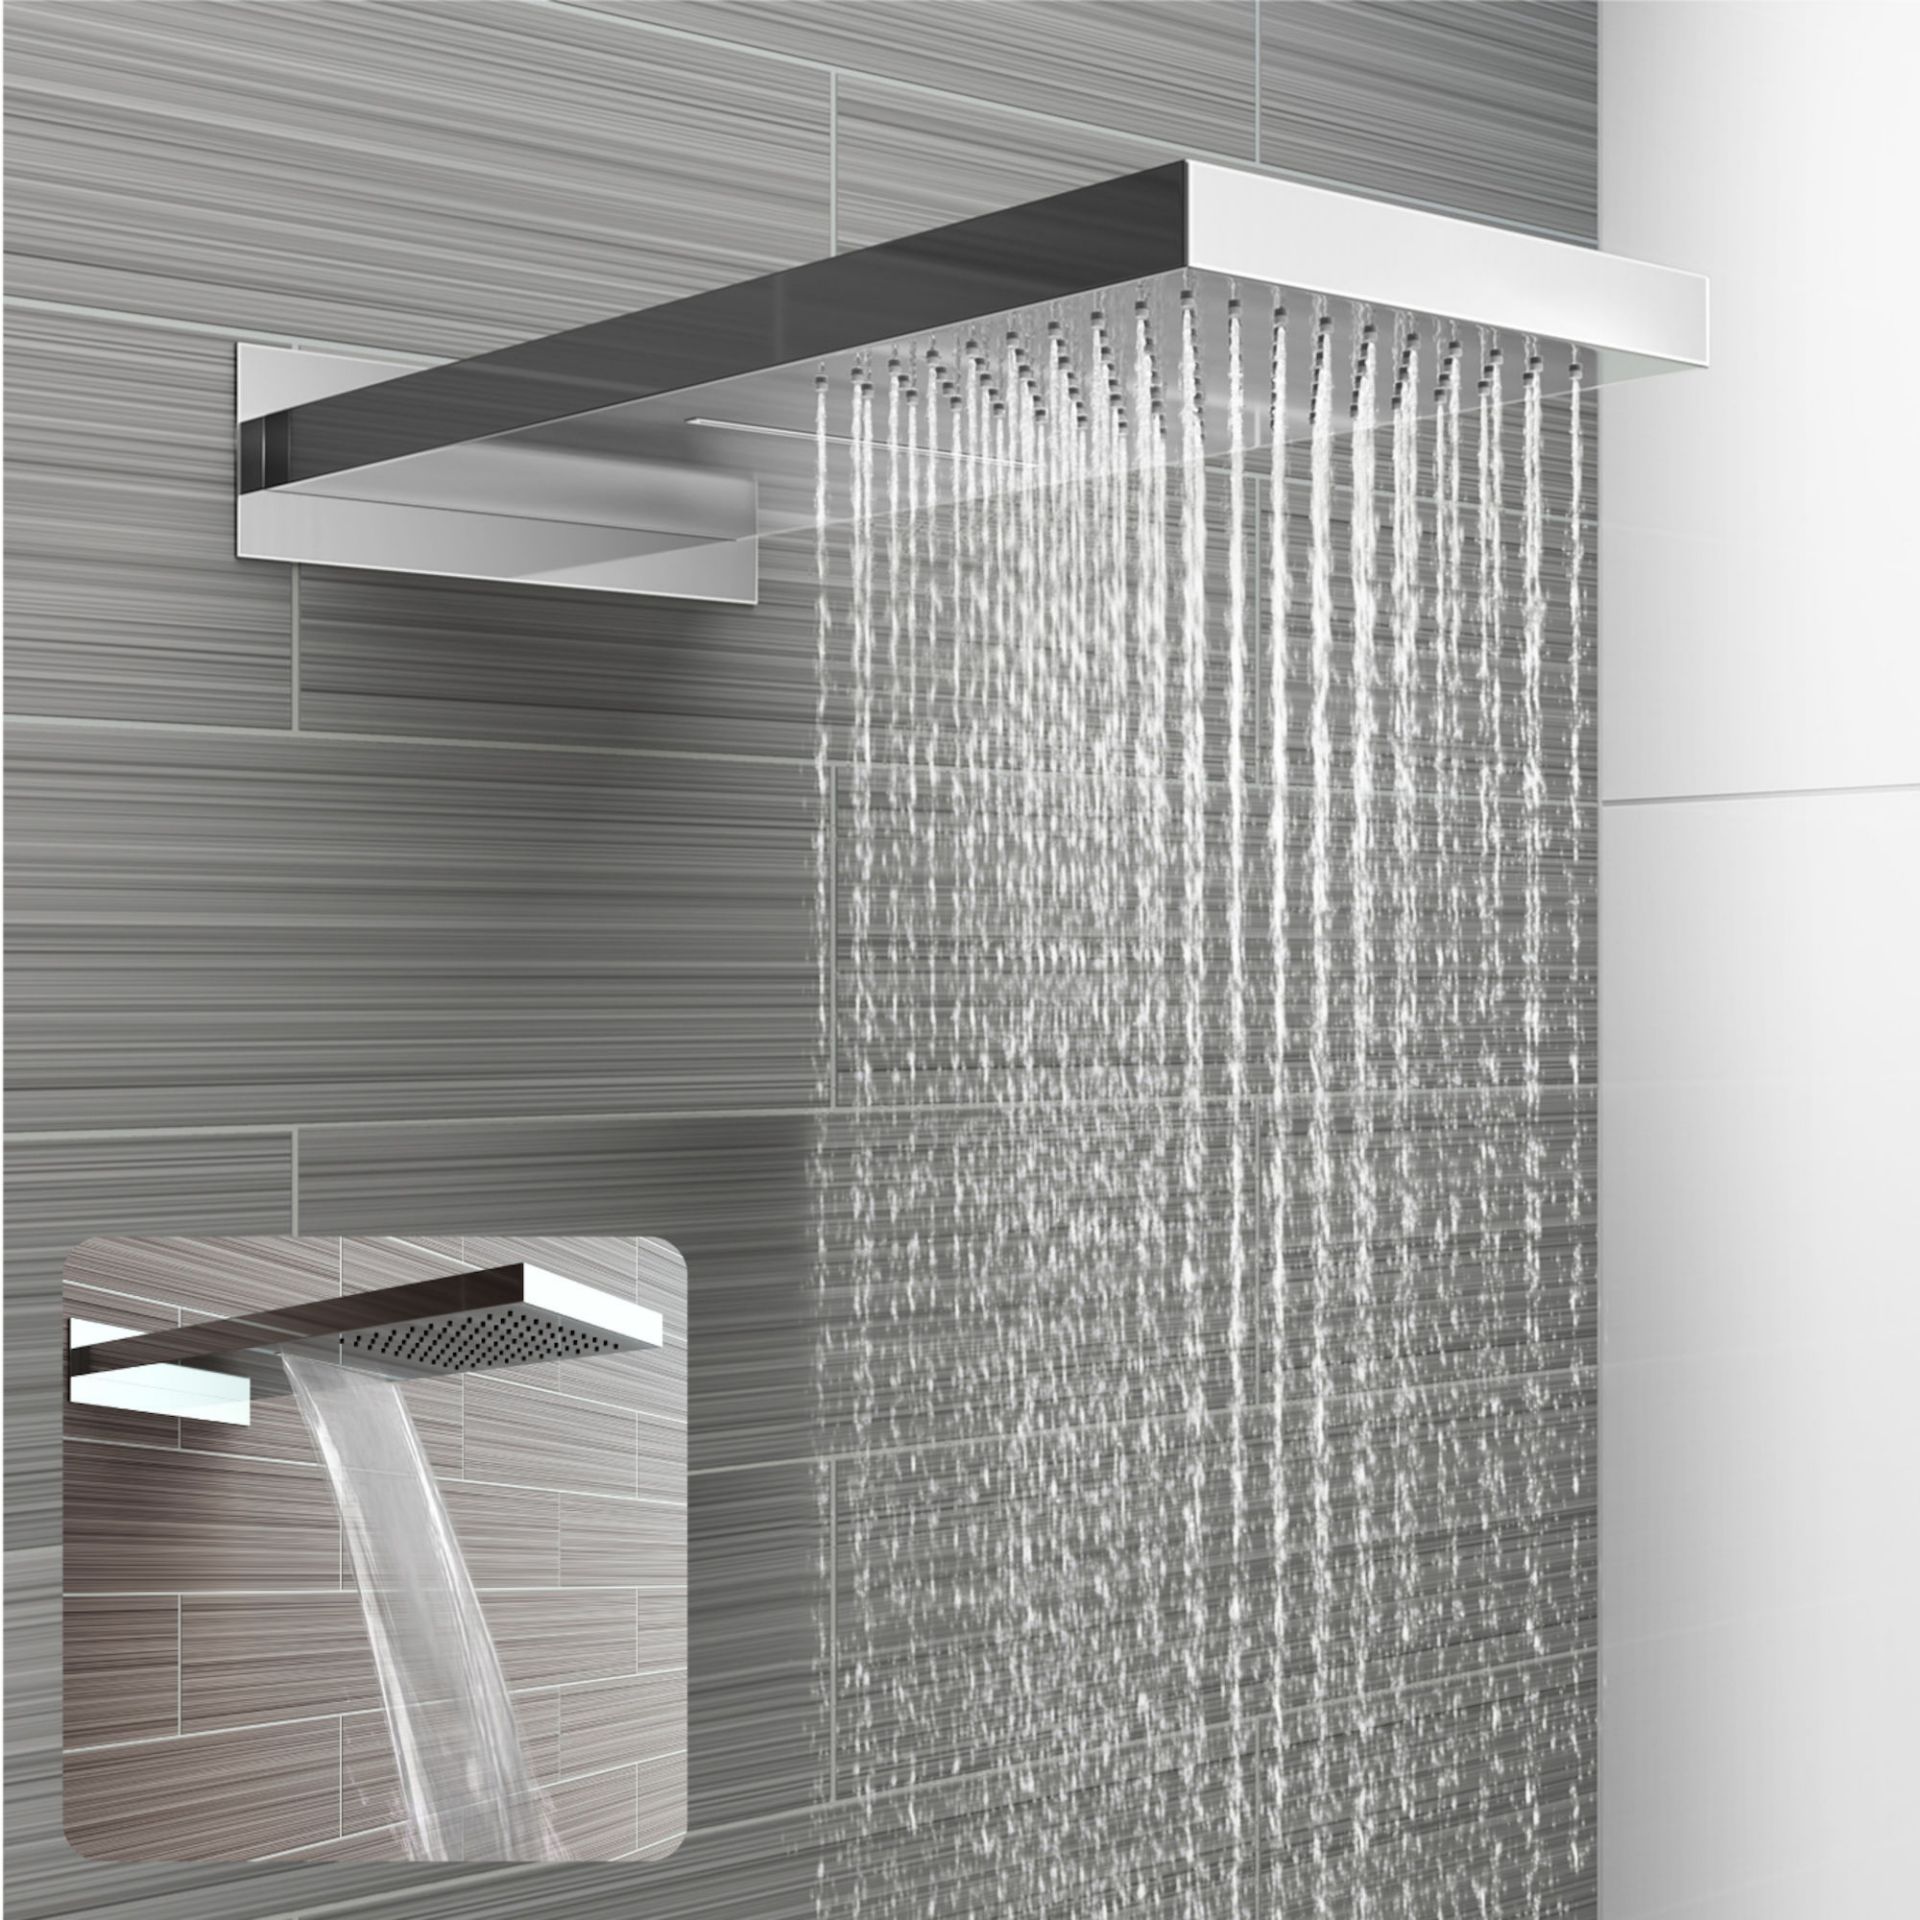 (TP105) Stainless Steel 230x500mm Waterfall Shower Head. RRP £374.99. Dual function waterfall and